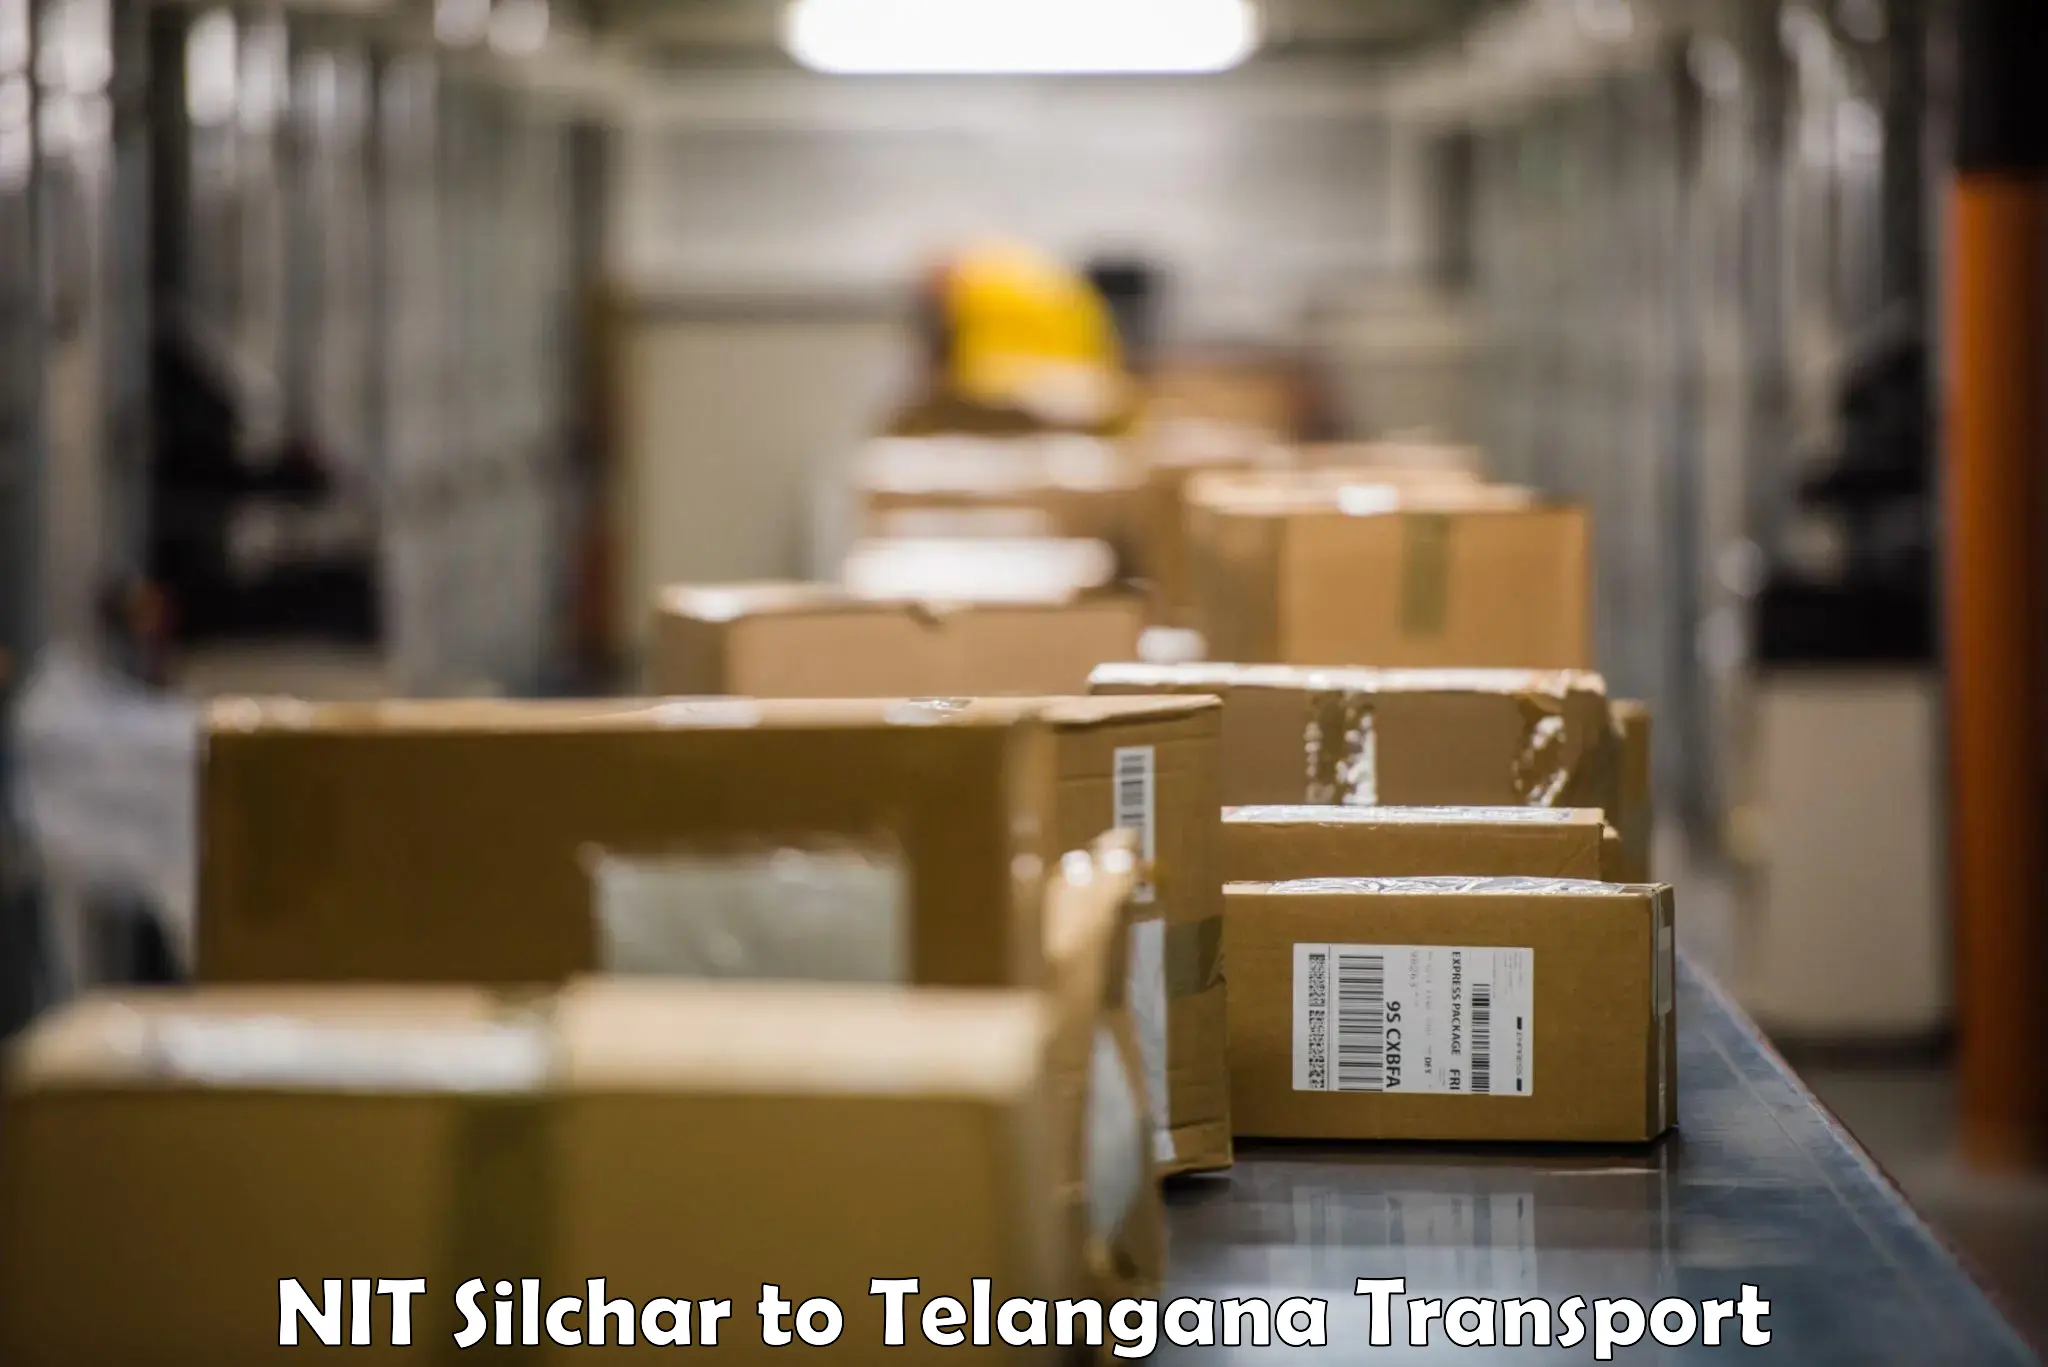 Nationwide transport services in NIT Silchar to Bhadrachalam